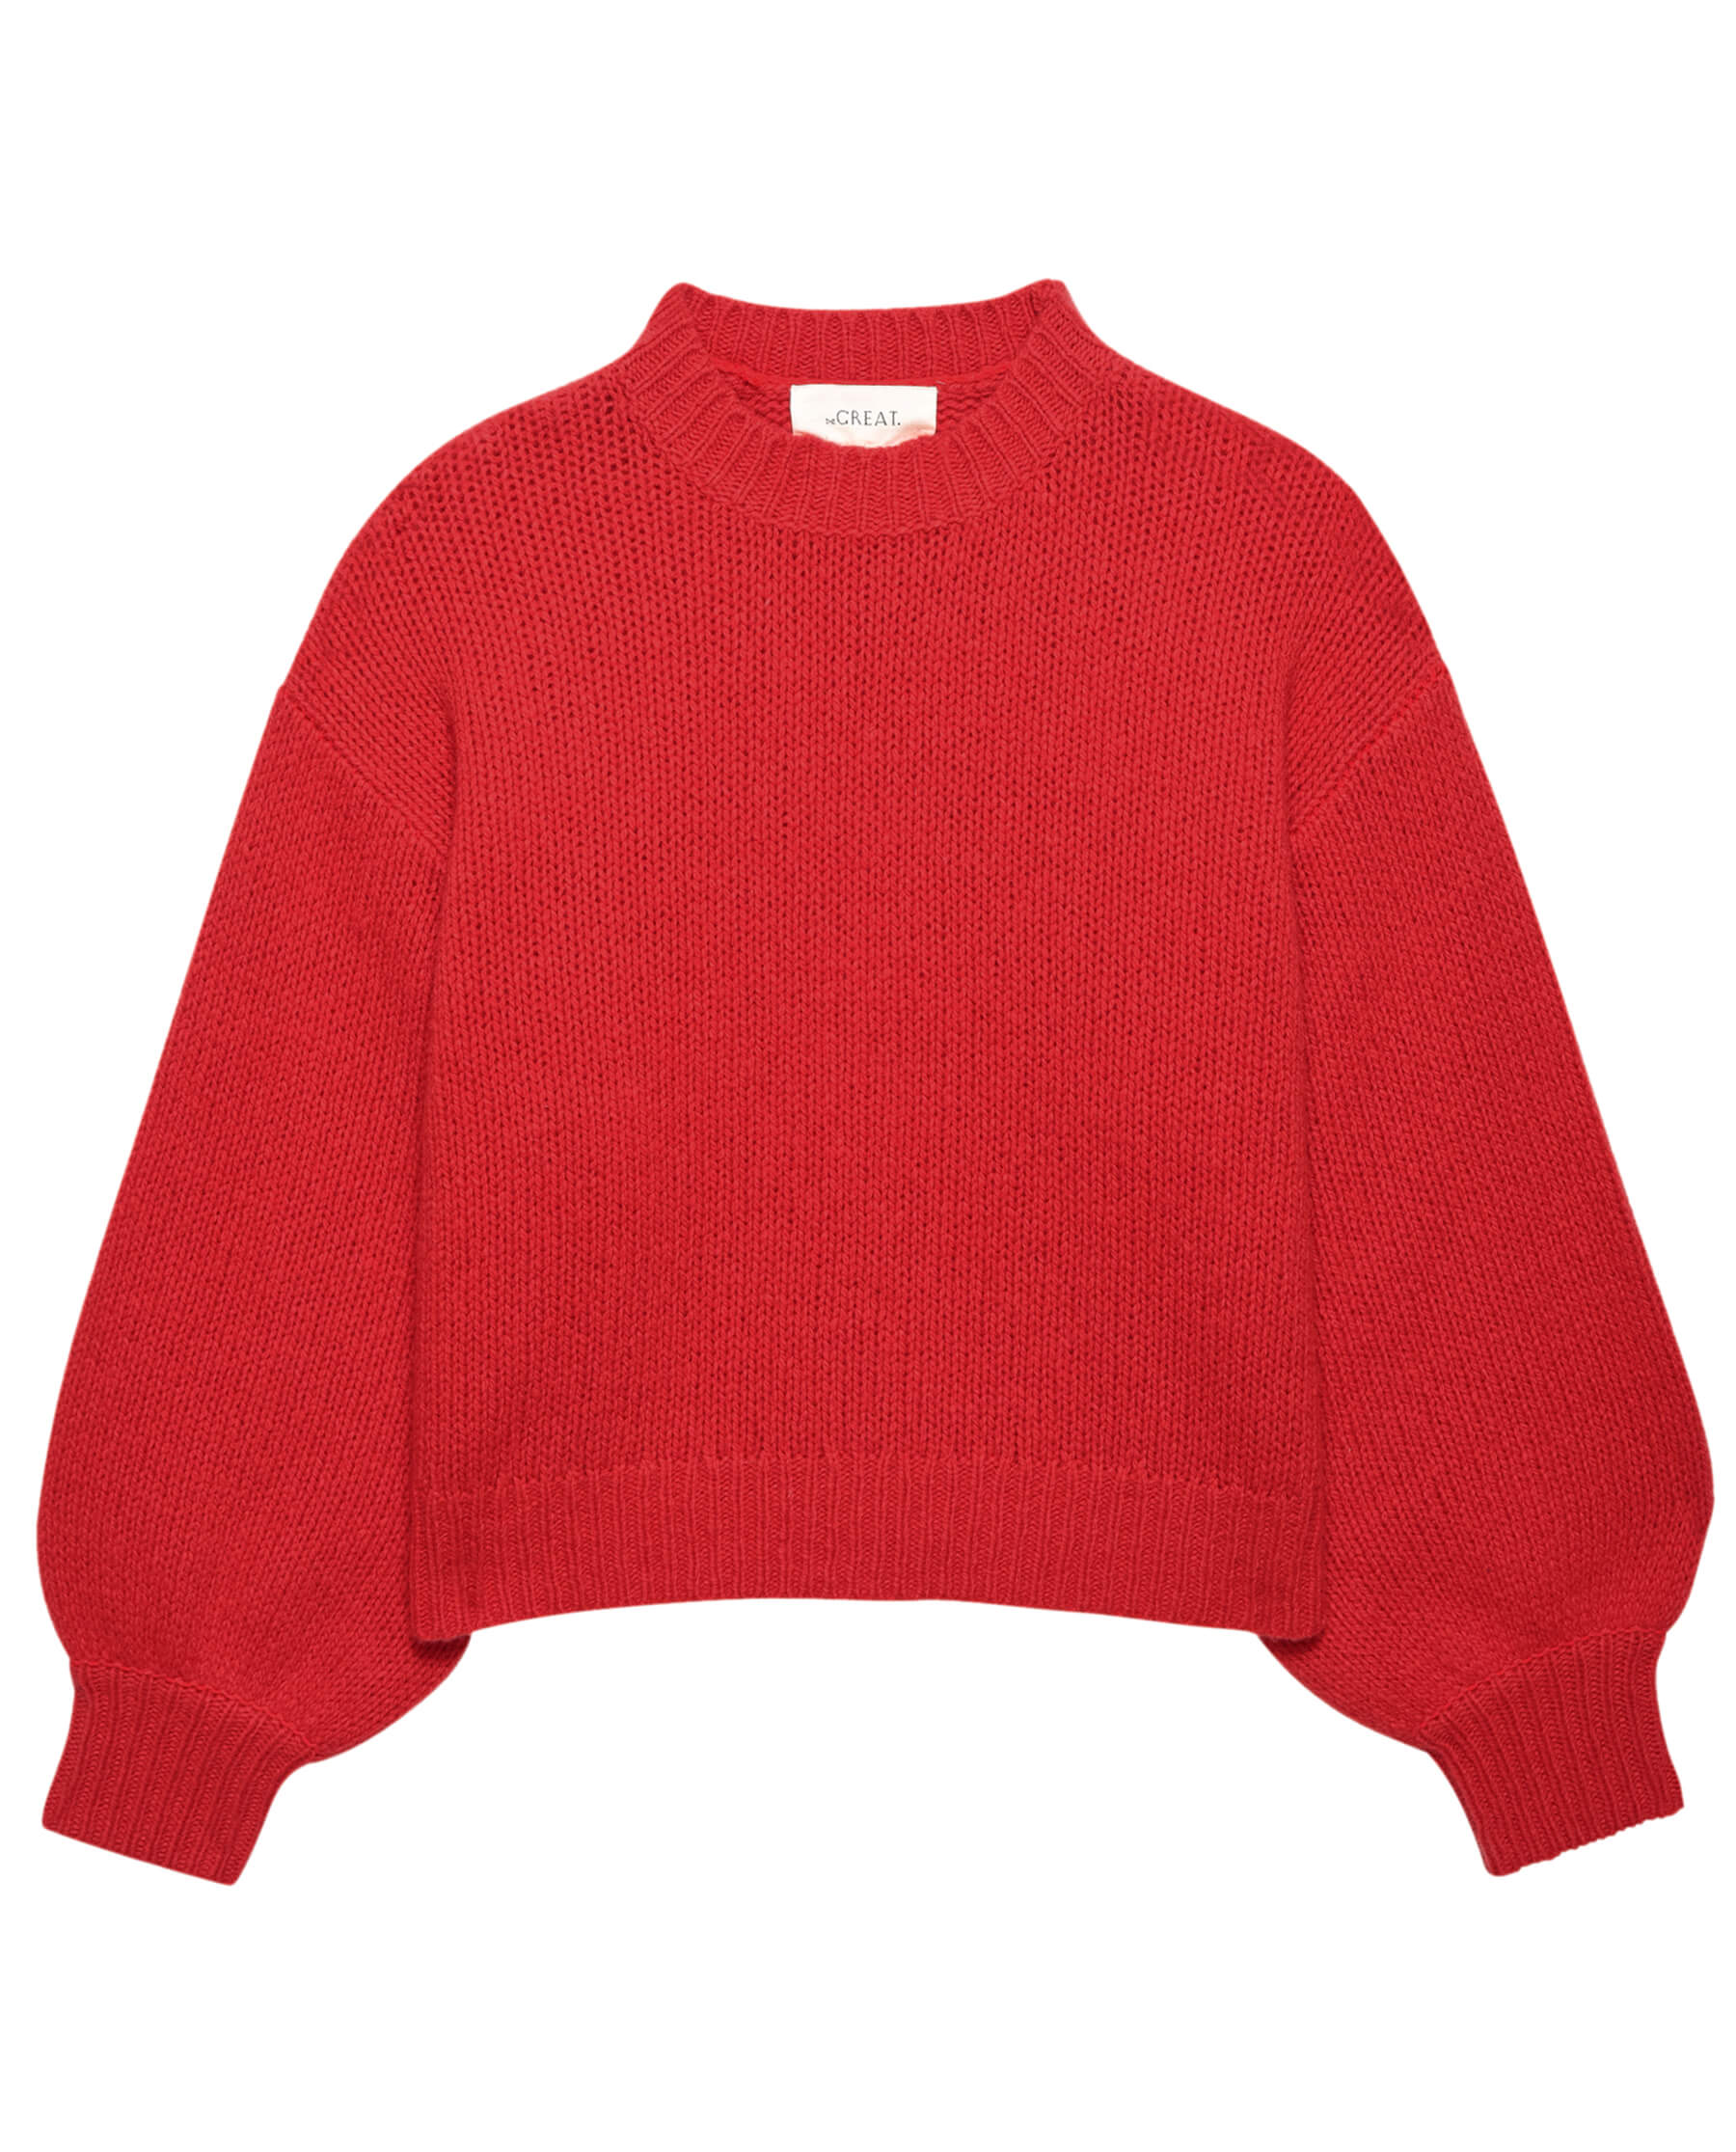 The Bubble Pullover. -- Persimmon SWEATERS THE GREAT. PS24 SALE